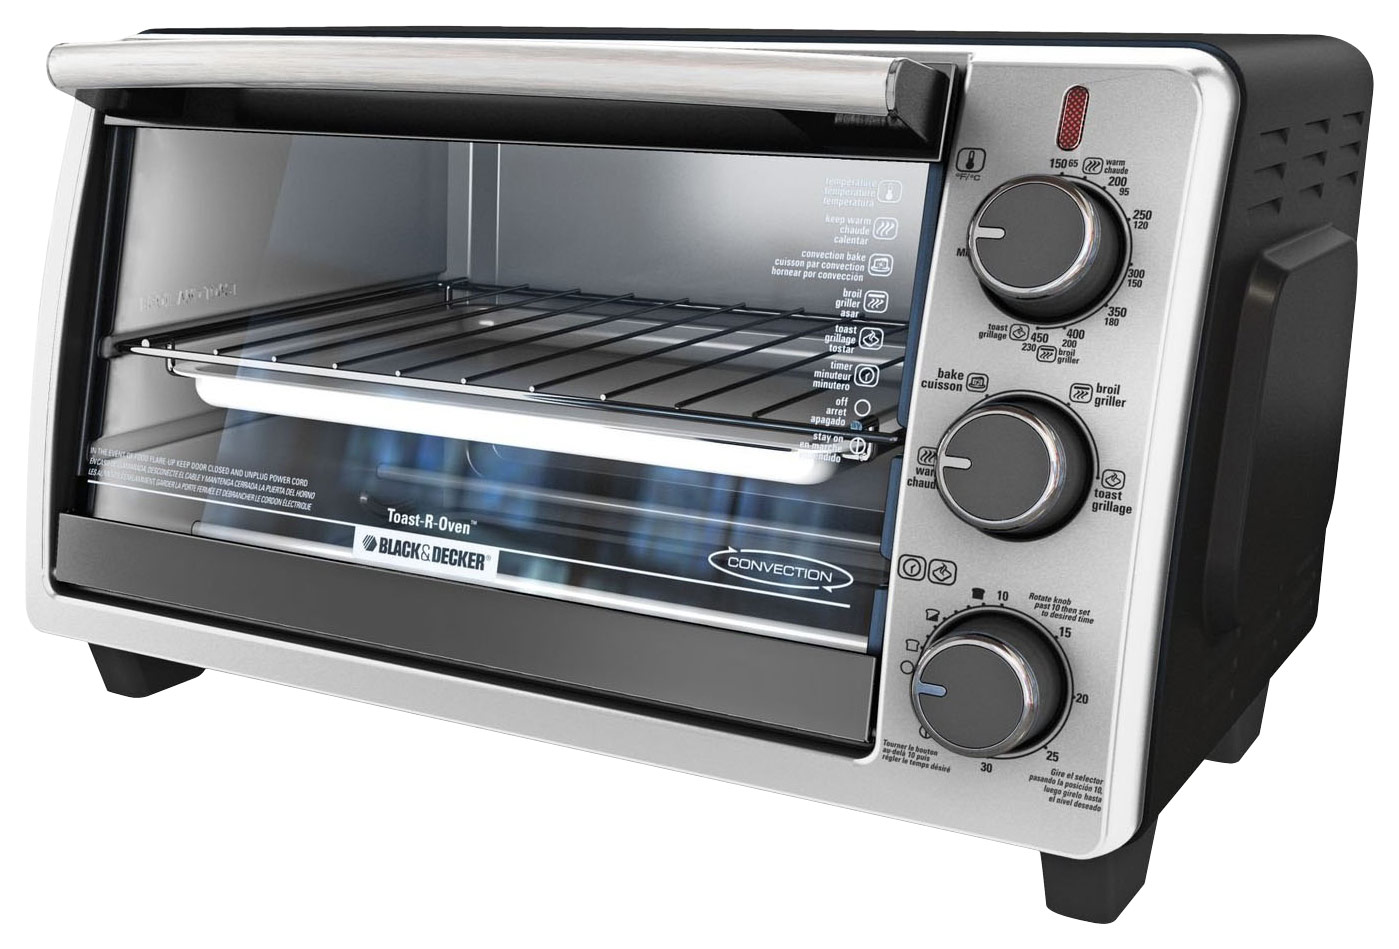 Best Buy: Black & Decker Convection Toaster/Pizza Oven Silver TO1635B